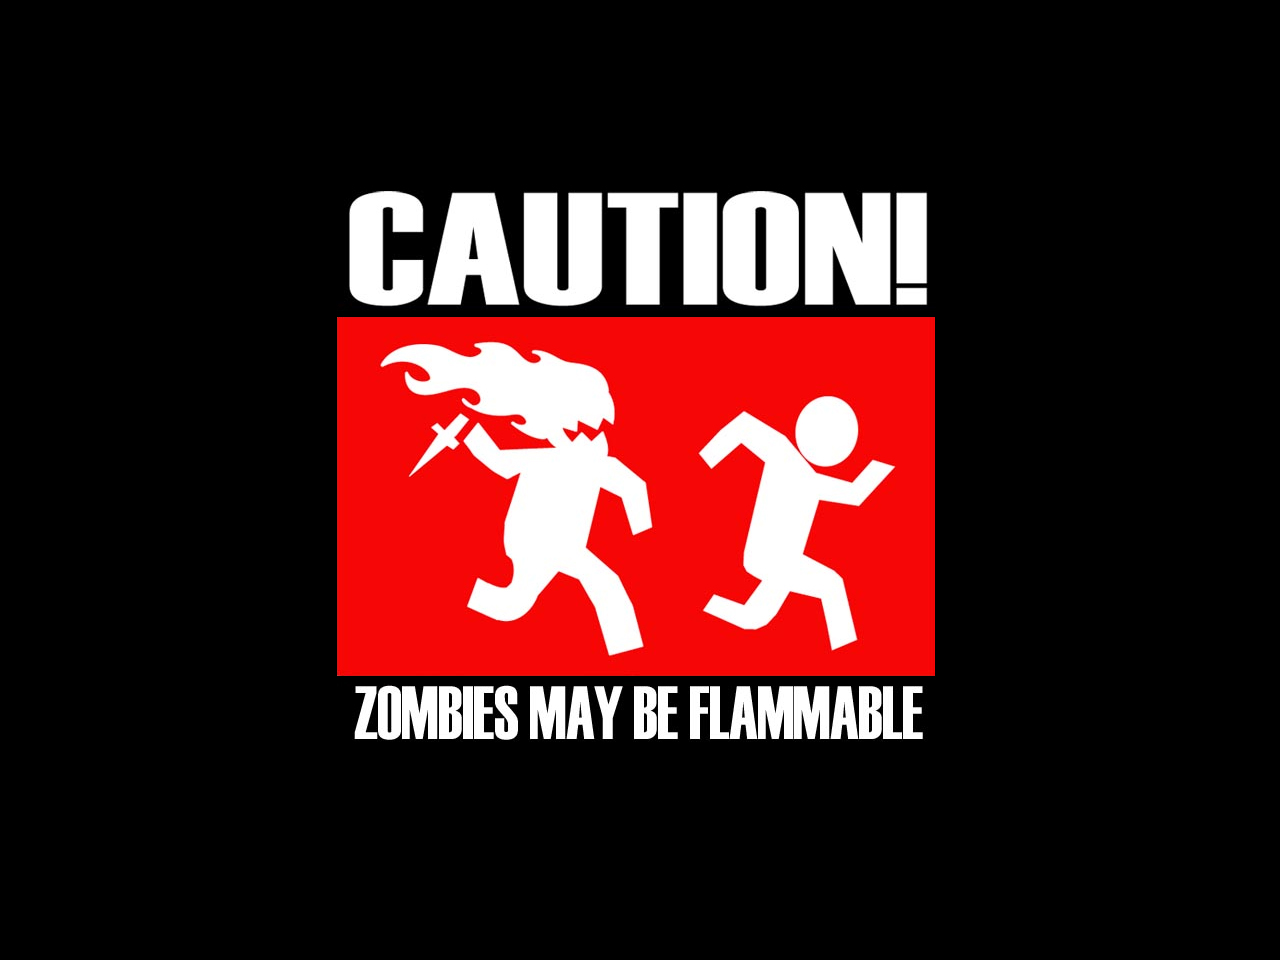 humor, just wrong, fire, zombie Image for desktop